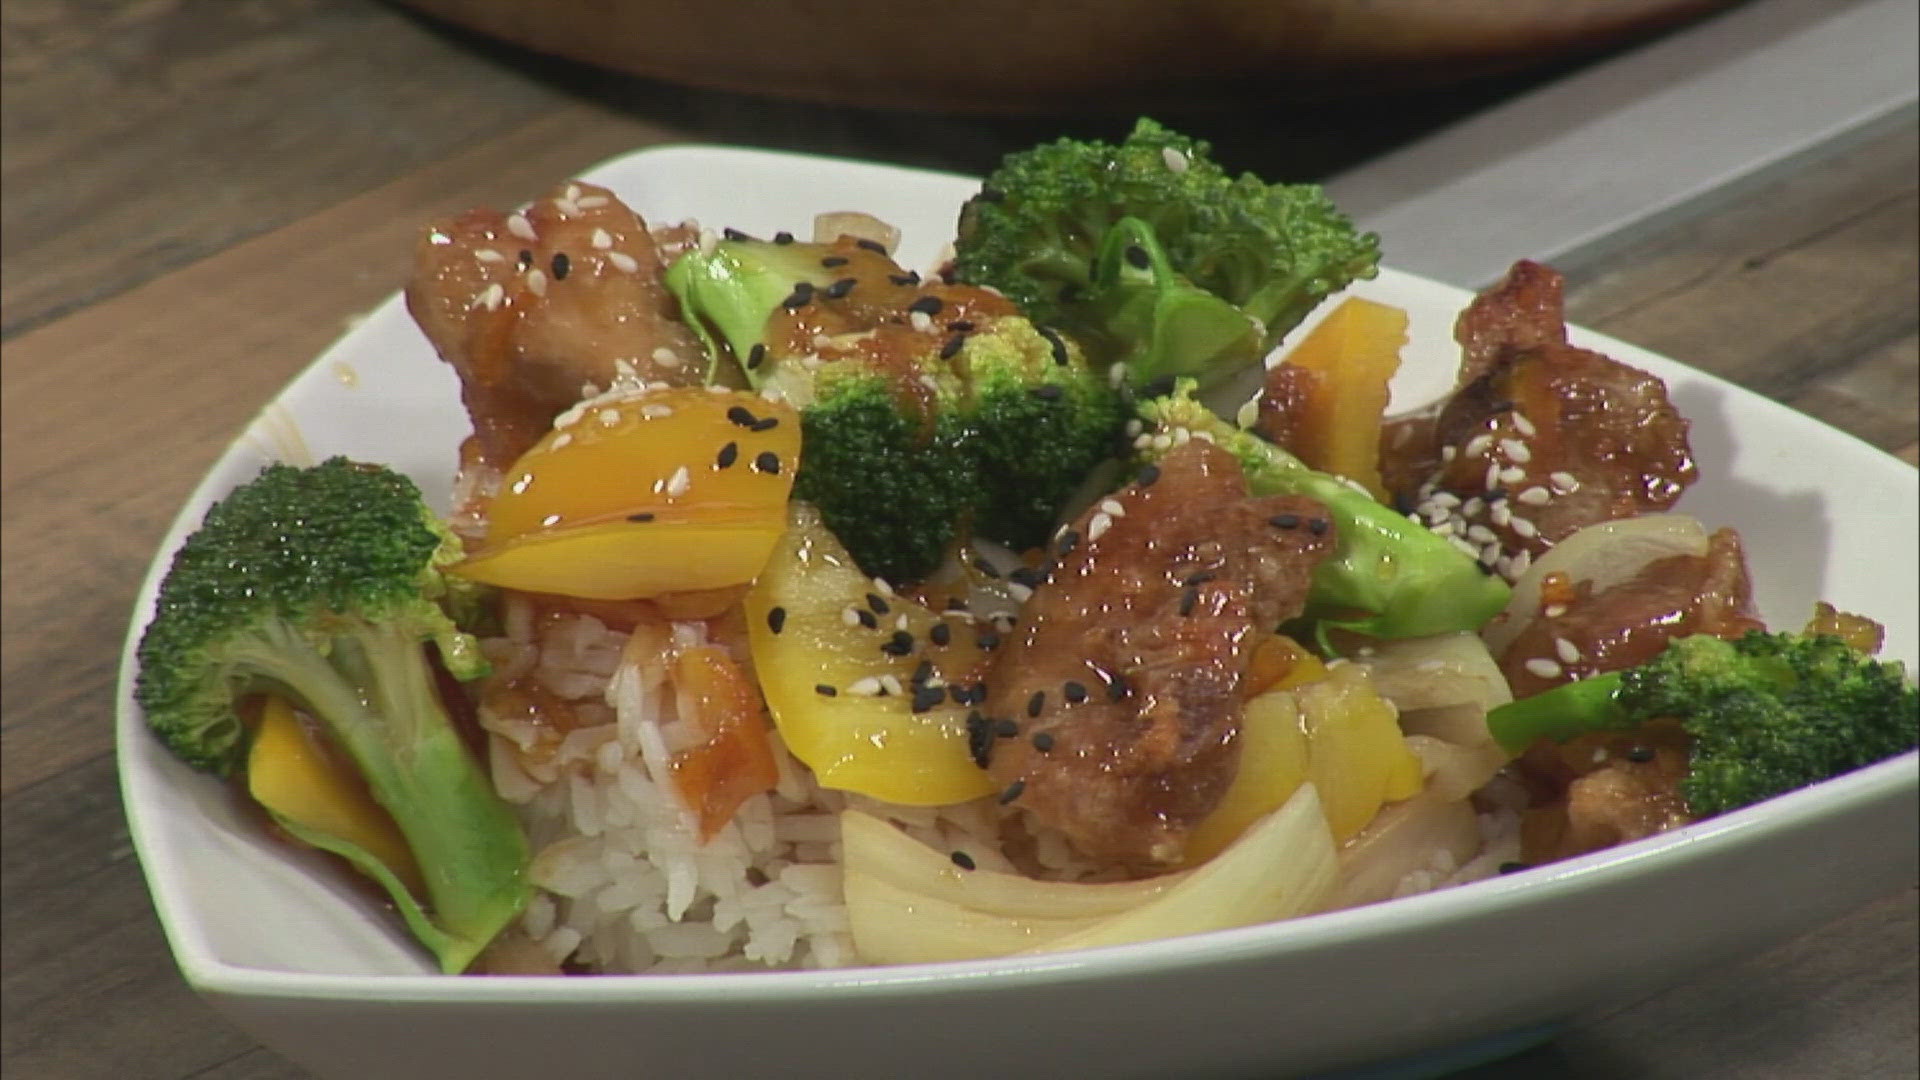 Chef Bo Byrne joins us in the 207 kitchen to share his recipe for orange chicken.